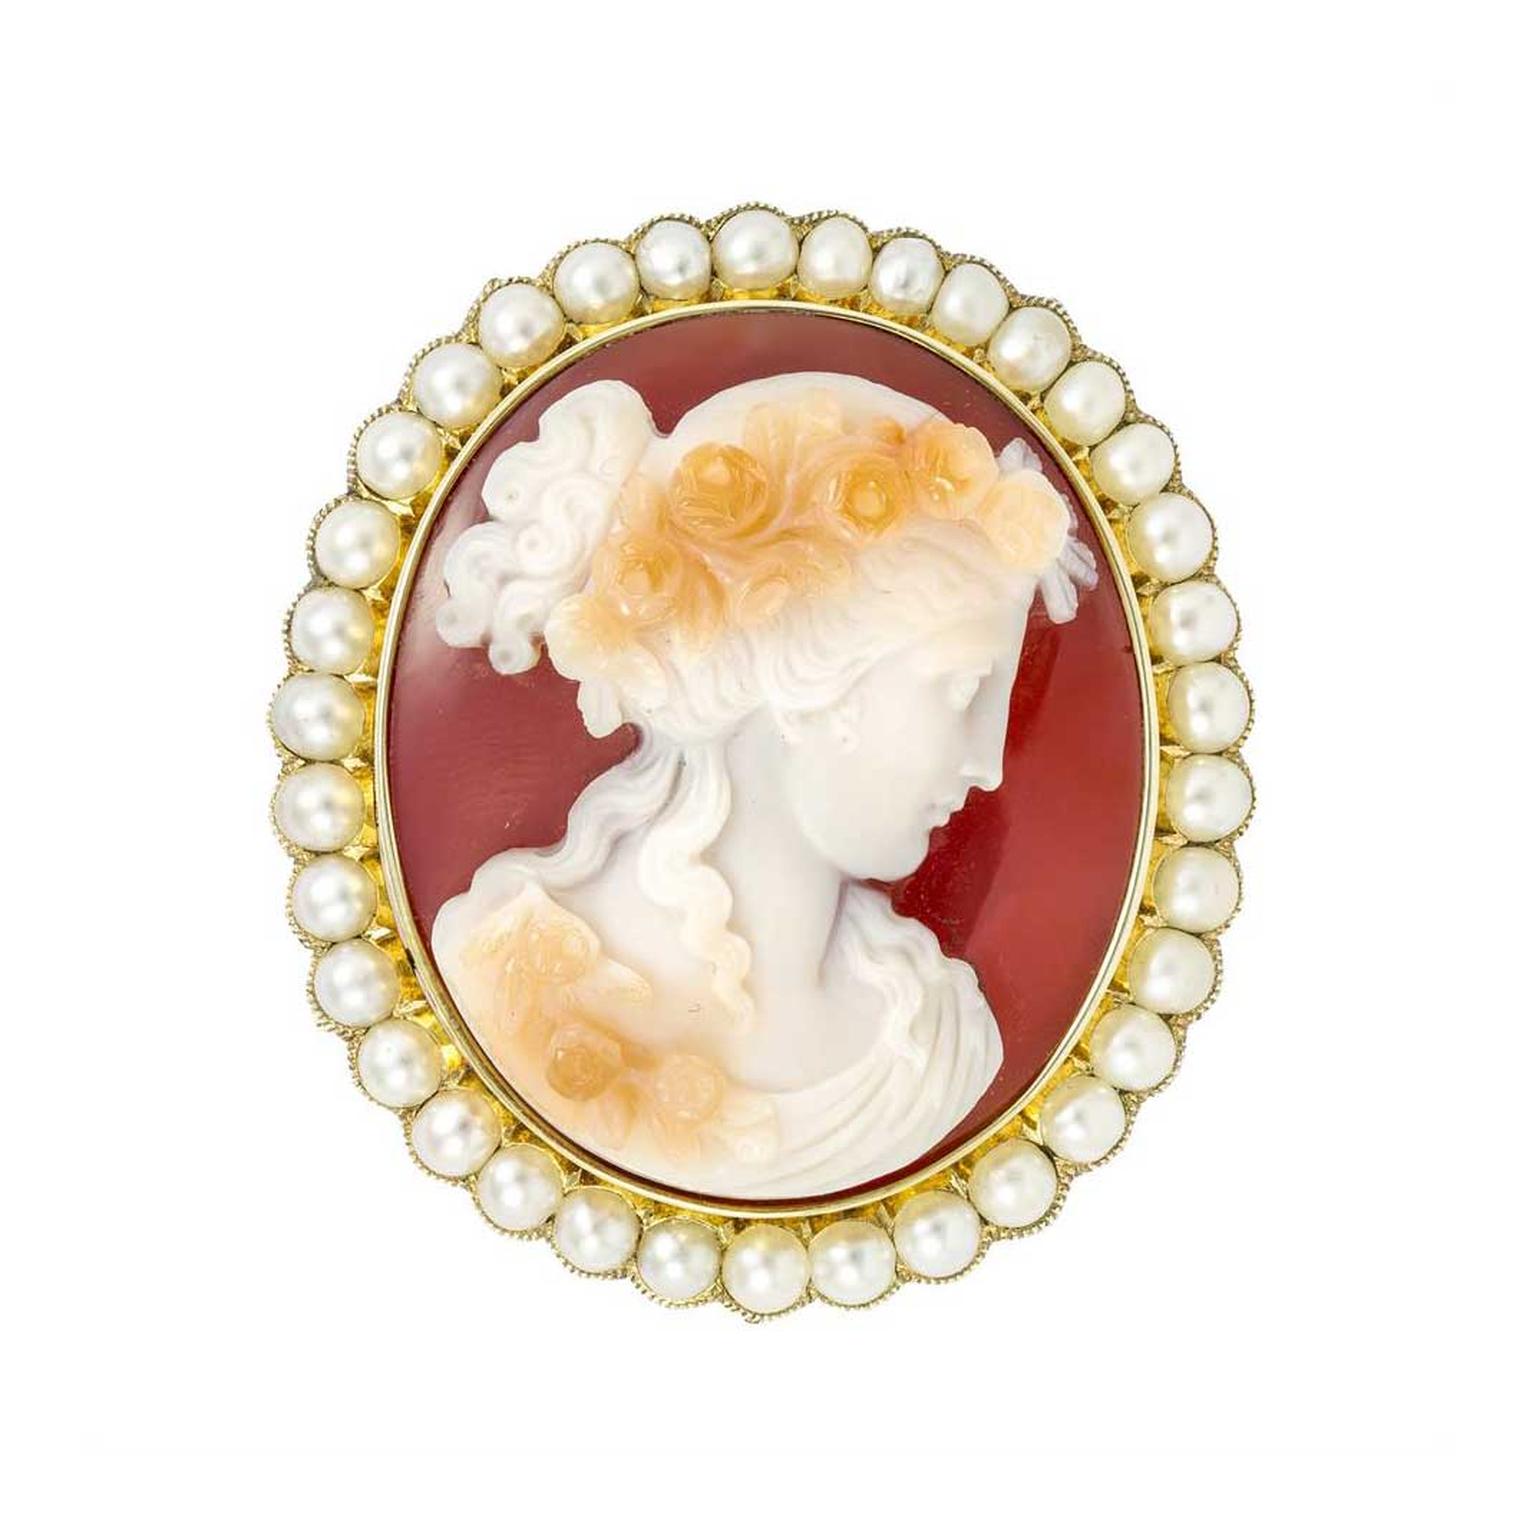 Authentic Chanel Brooch - How to style a brooch in 10 different ways